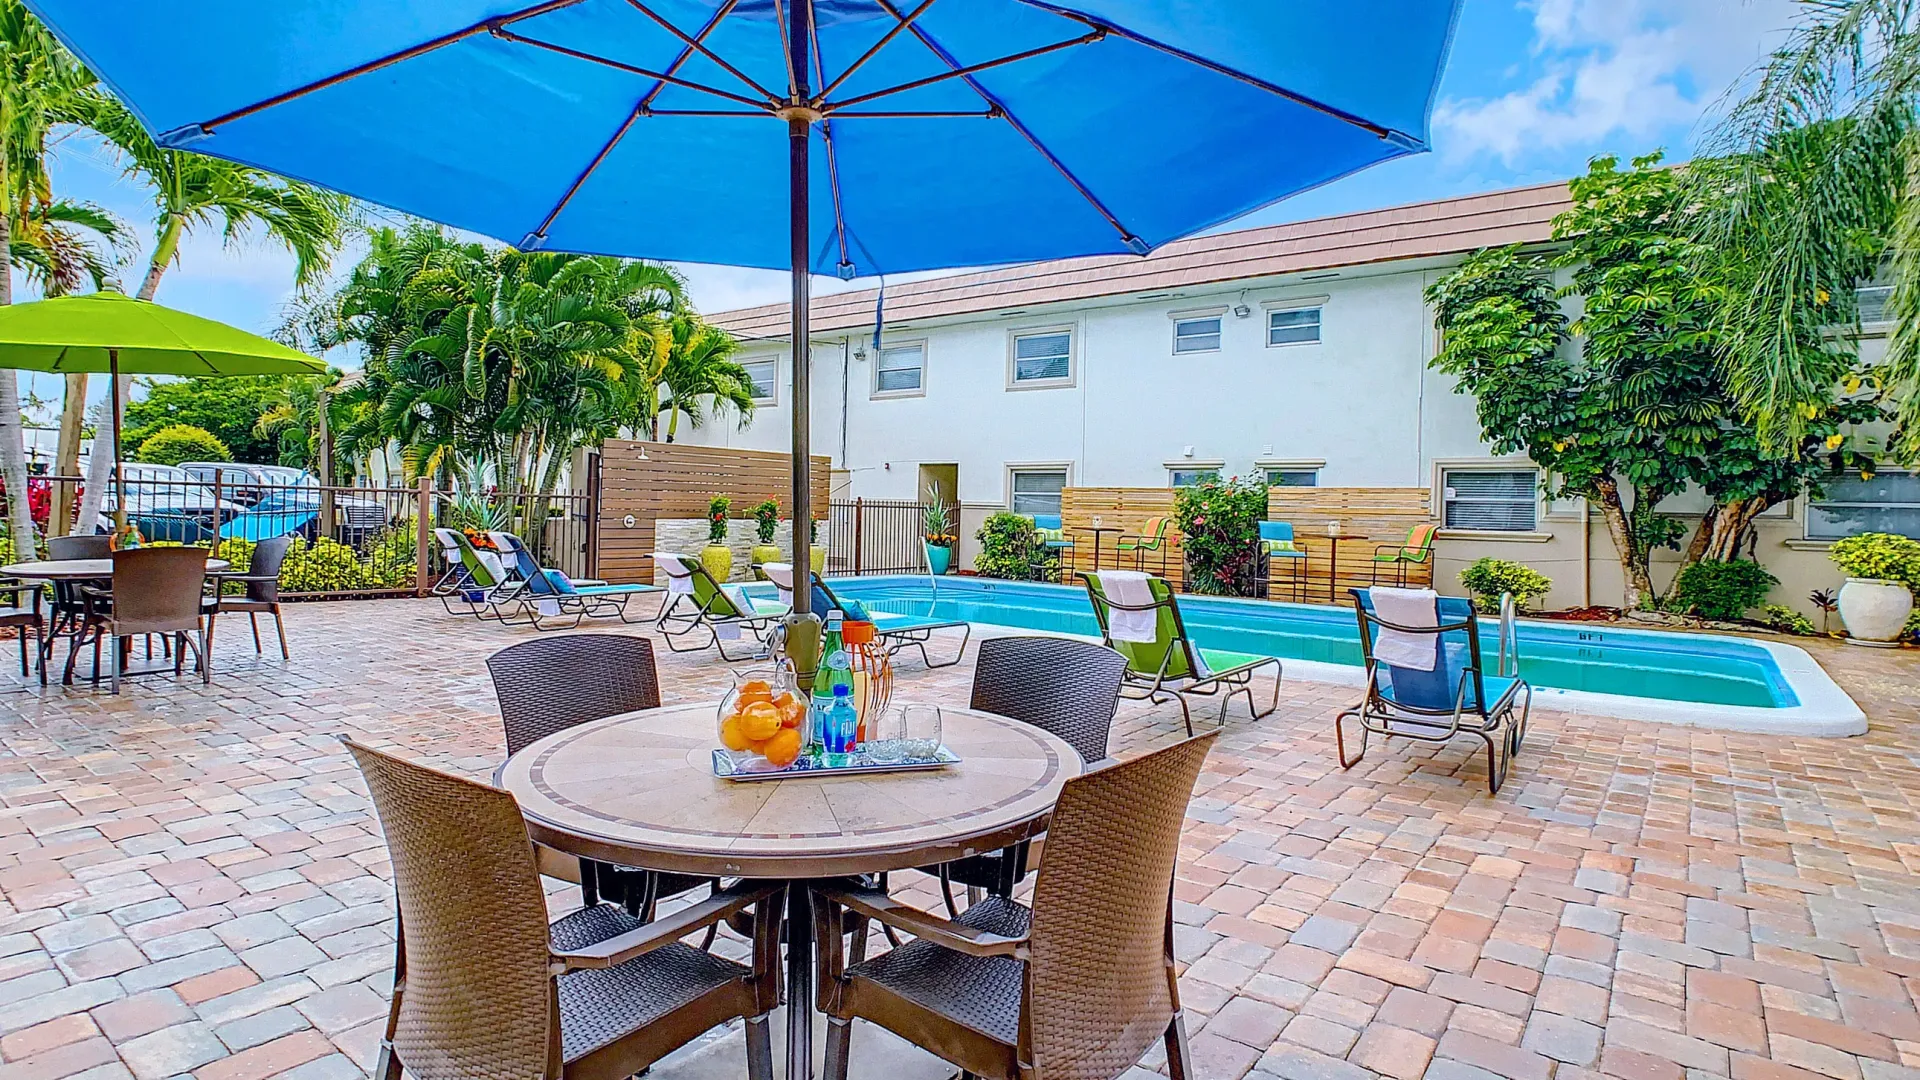 Vibrant umbrellas shading dining tables on the inviting pool deck offering a spot to dine and relax under the shade.